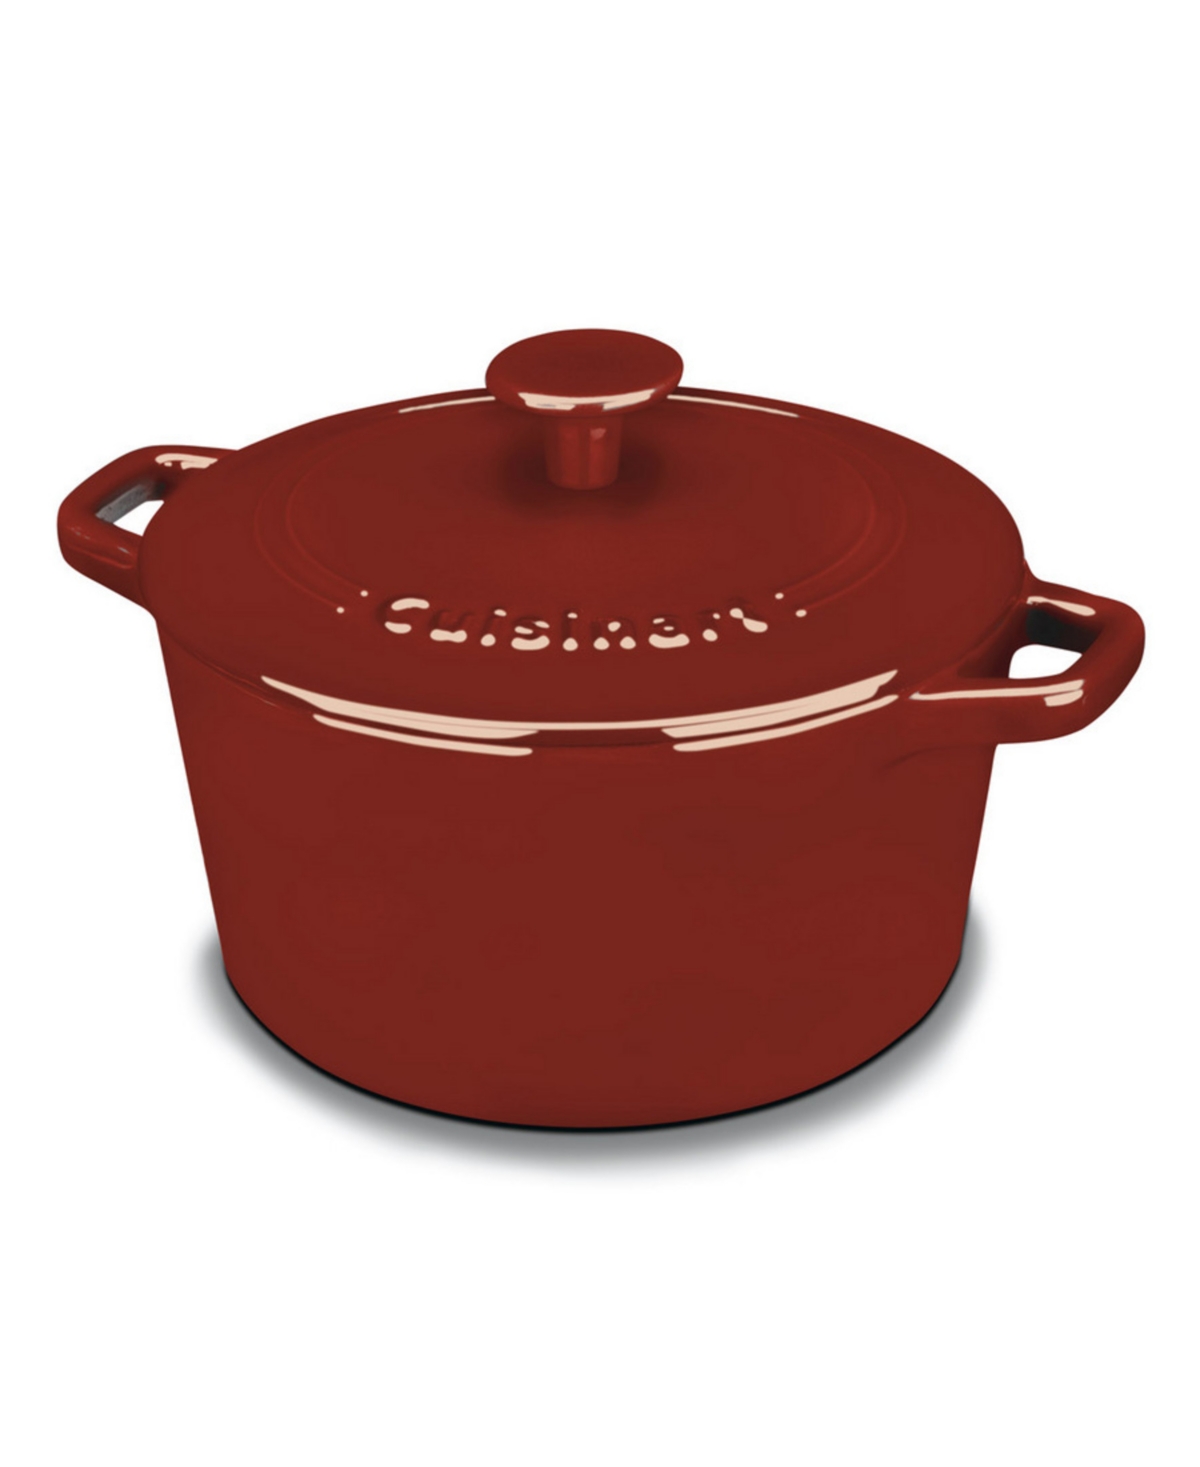 Cuisinart Chefs Classic Enameled Cast Iron 3-qt. Round Covered Casserole In Red